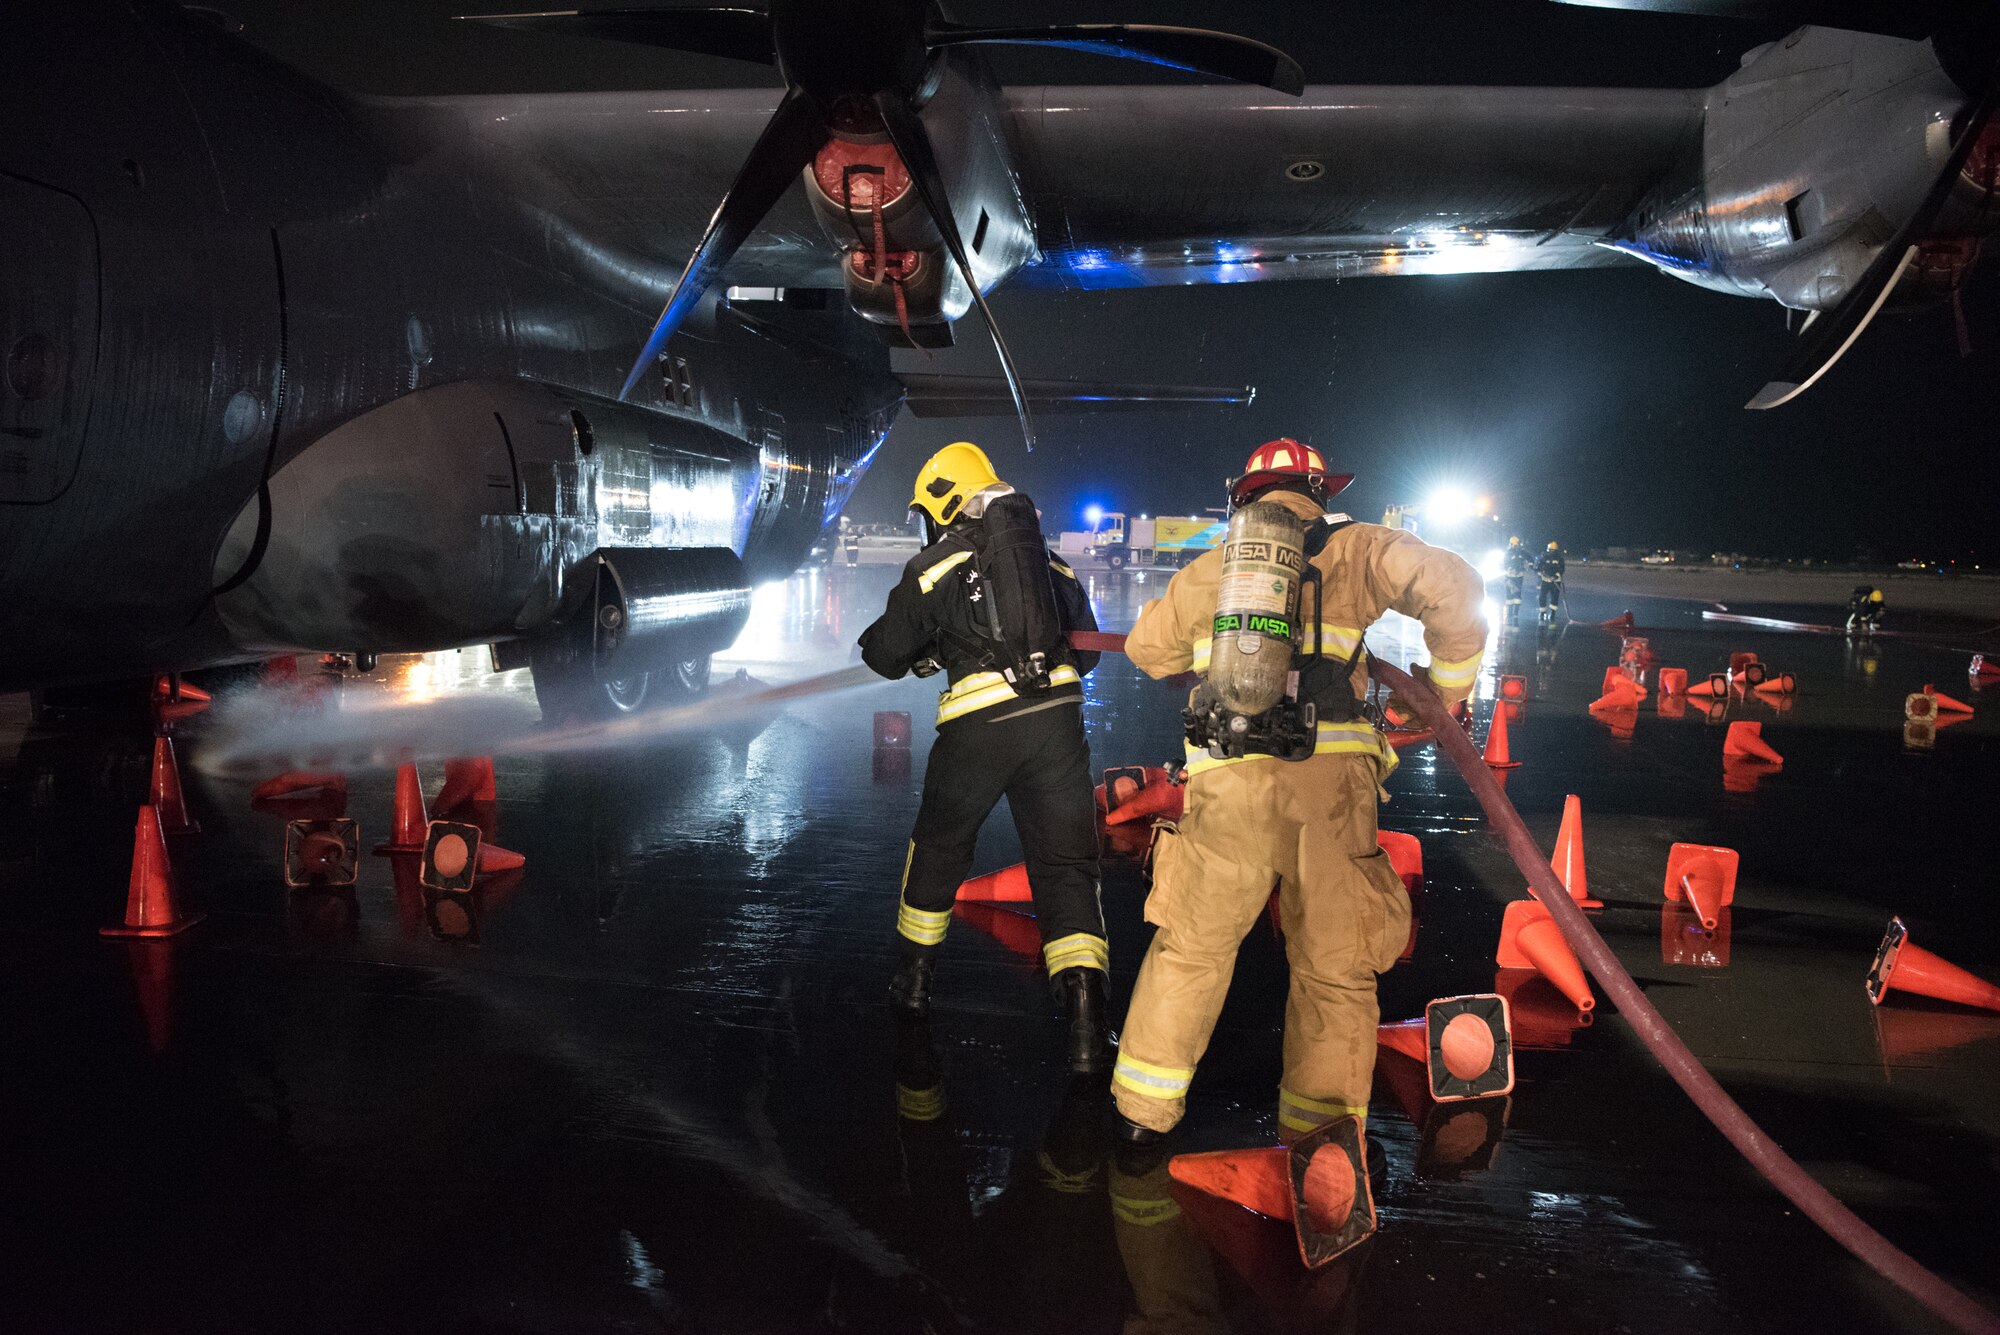 Firefighters from the 379th Expeditionary Civil Engineer Squadron and Qatar Emiri Air Force collaborate in a joint training exercise at Al Udeid Air Base, Qatar, Feb. 28, 2018. The exercise, a simulated response to a C-130 Hercules aircraft fire emergency, marks the first instance of the partner forces responding together in the same vehicles. (U.S. Air Force photo by Staff Sgt. Joshua Horton)